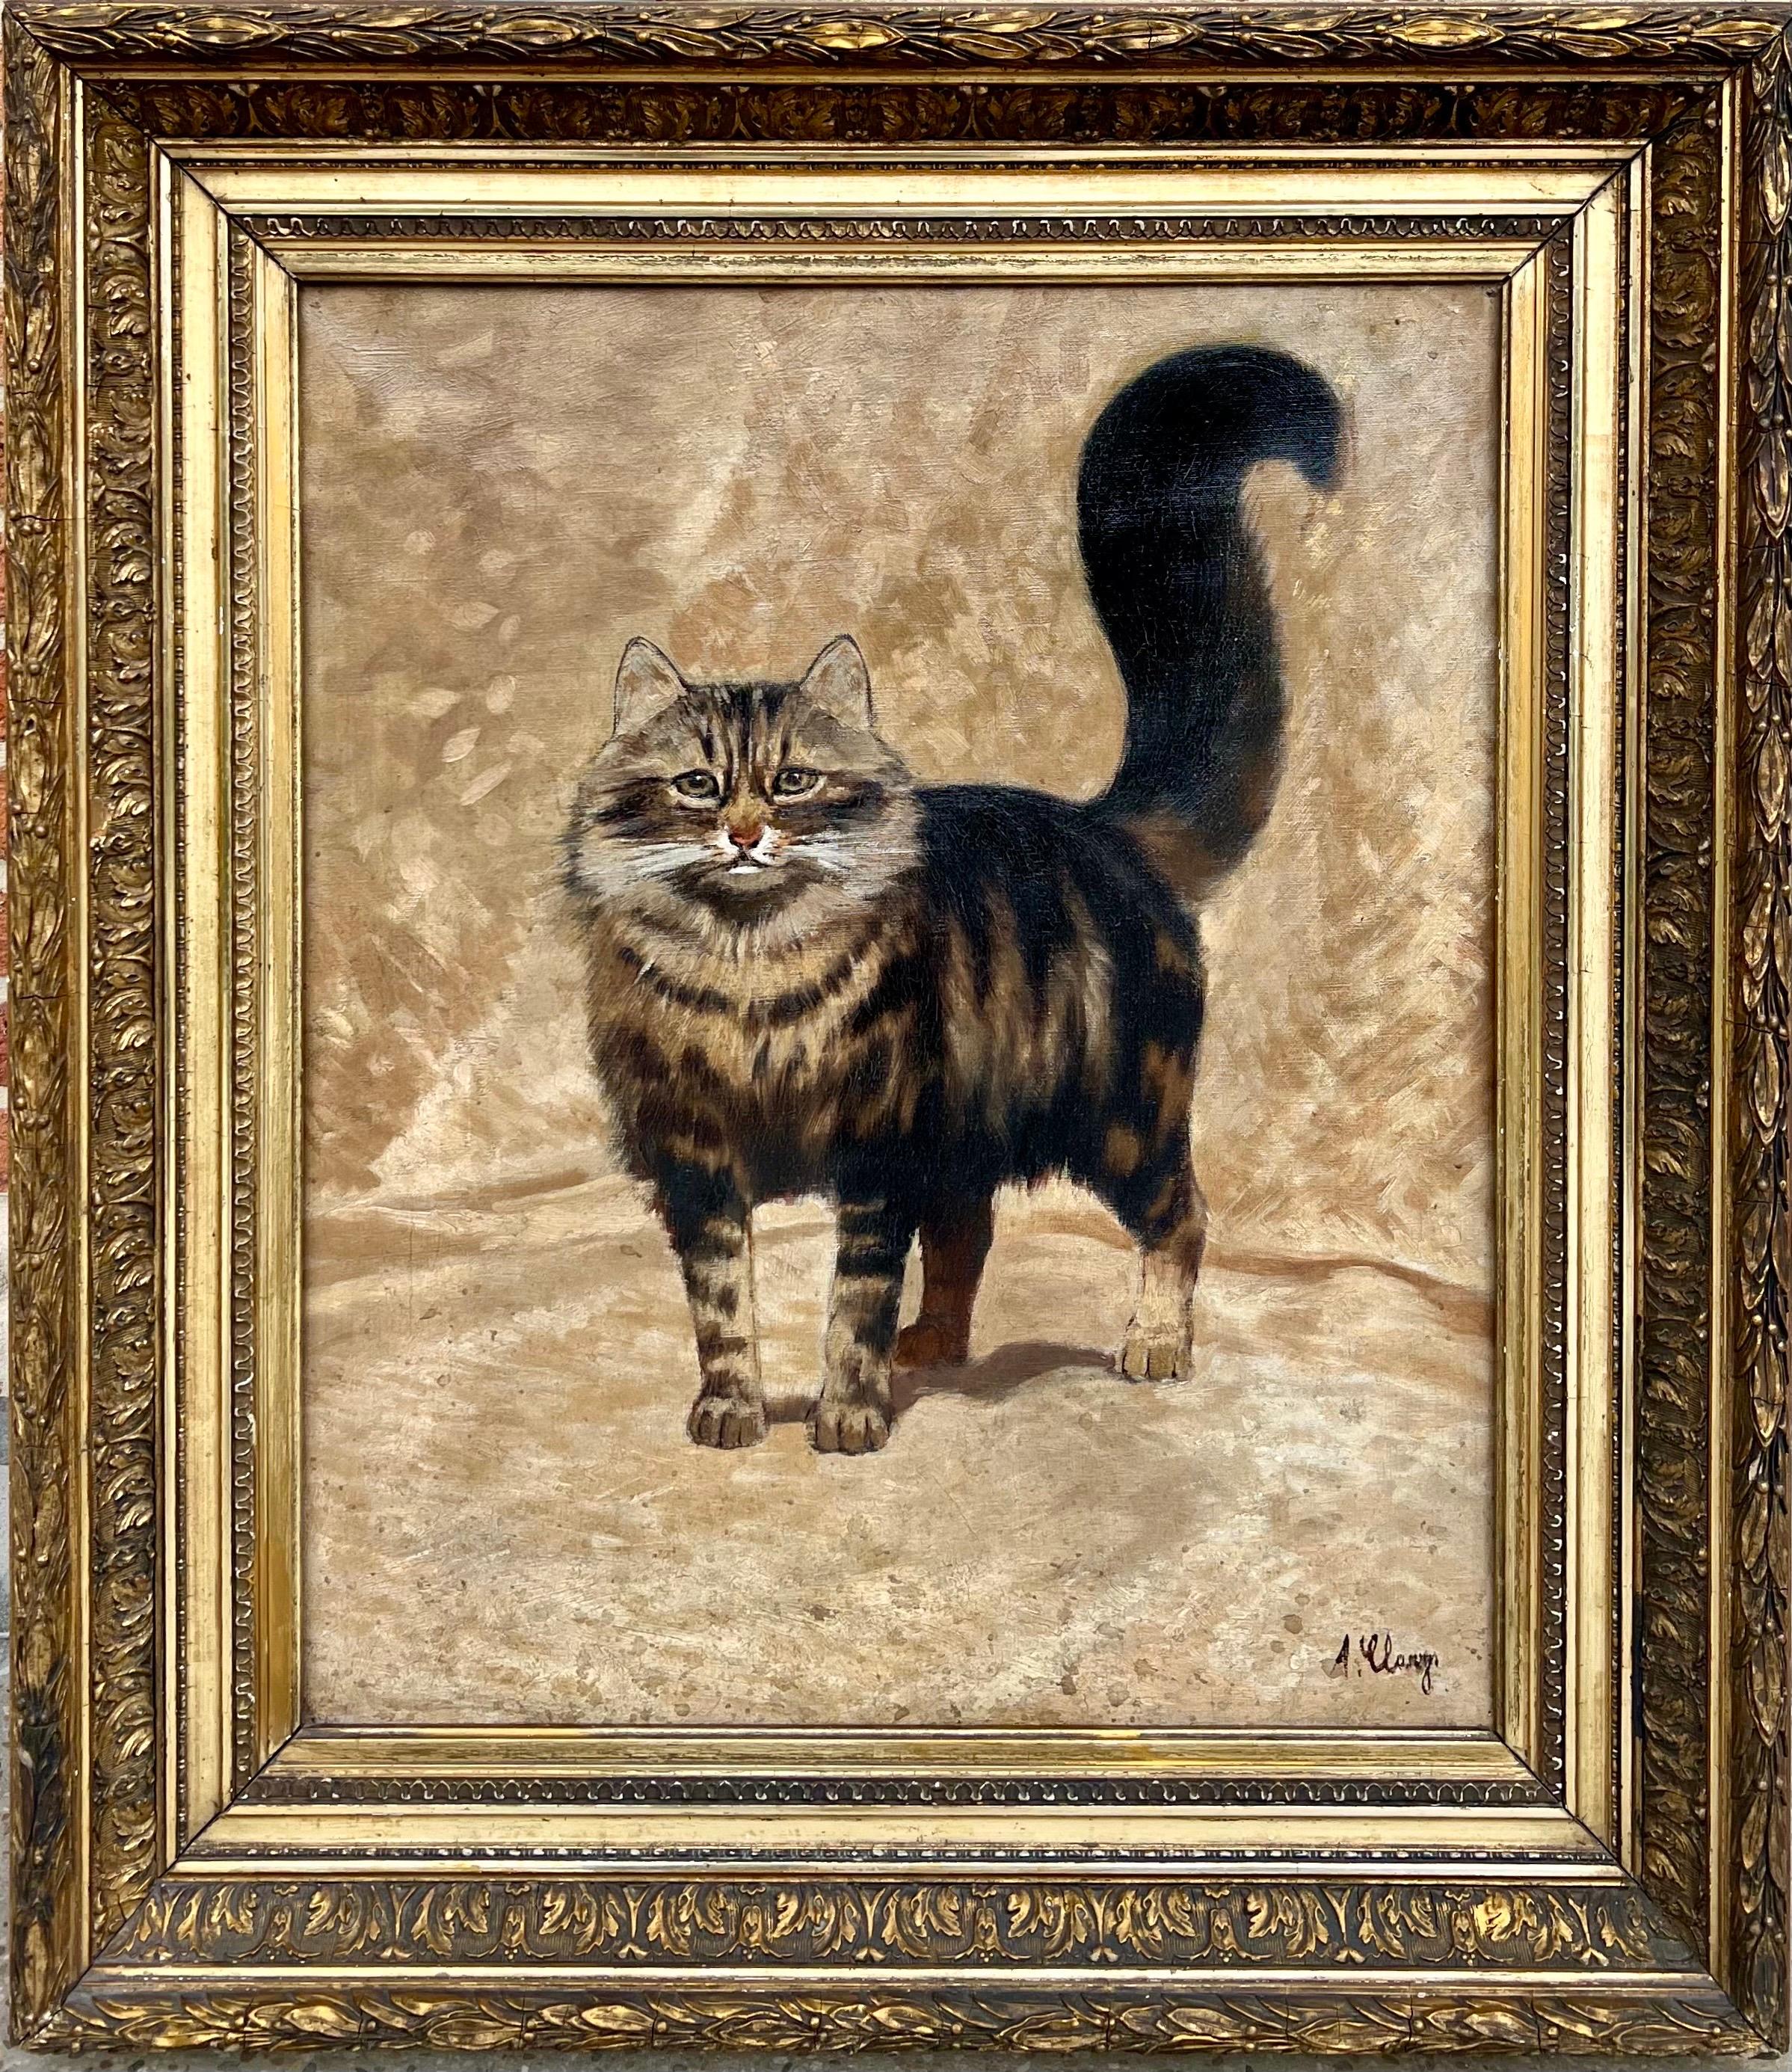 19th century cat portrait painting - "Le Chat " - Ragamuffin - Maine coon